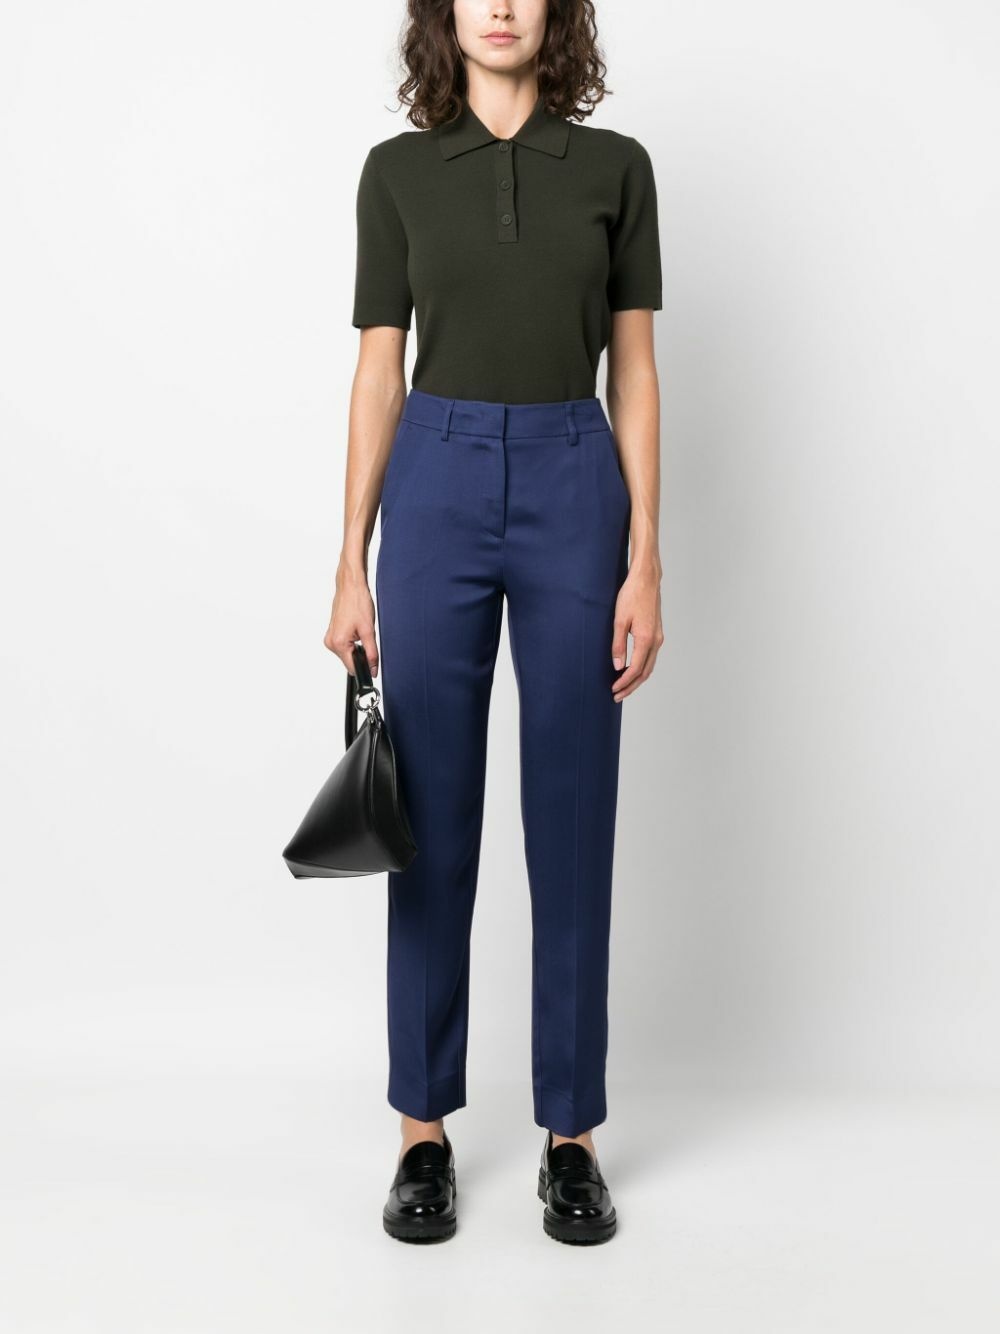 EMPORIO ARMANI - High-waisted Trousers